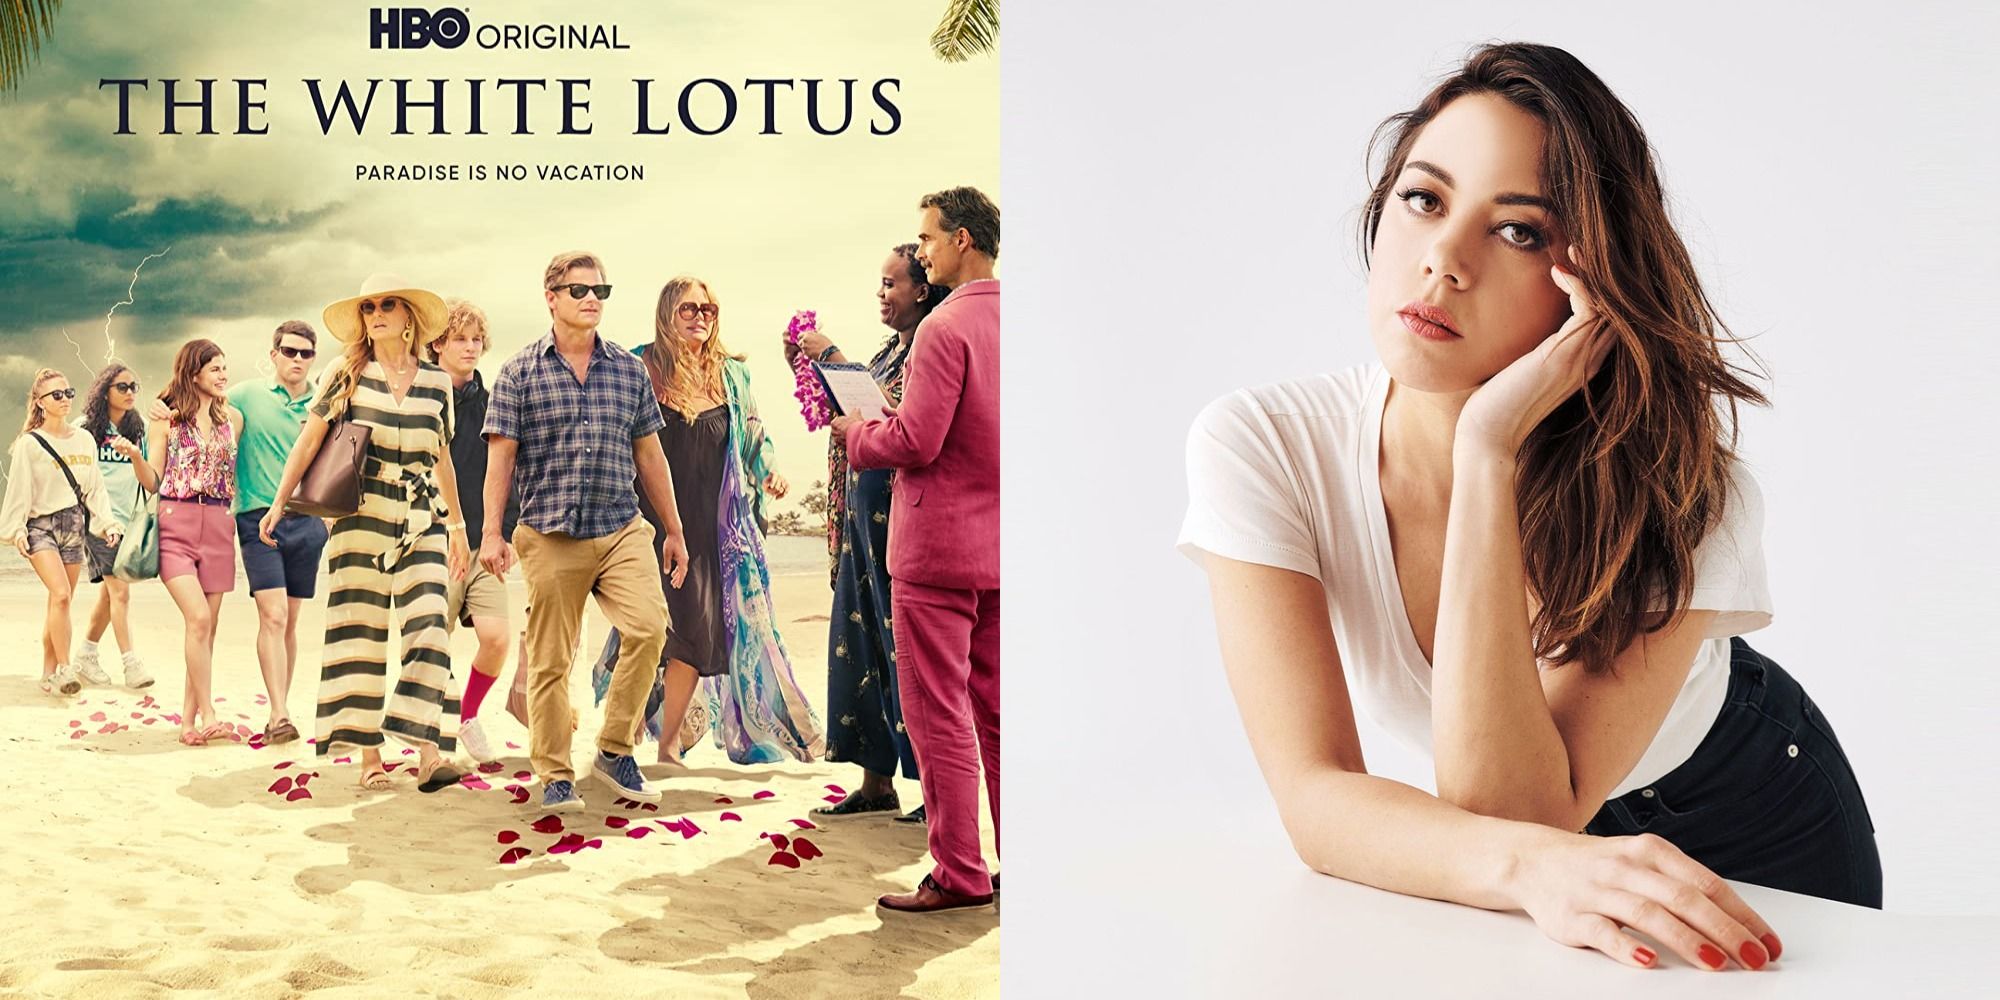 5 Things You Can Learn From Season 2 Of White Lotus. — Pulltab Sports